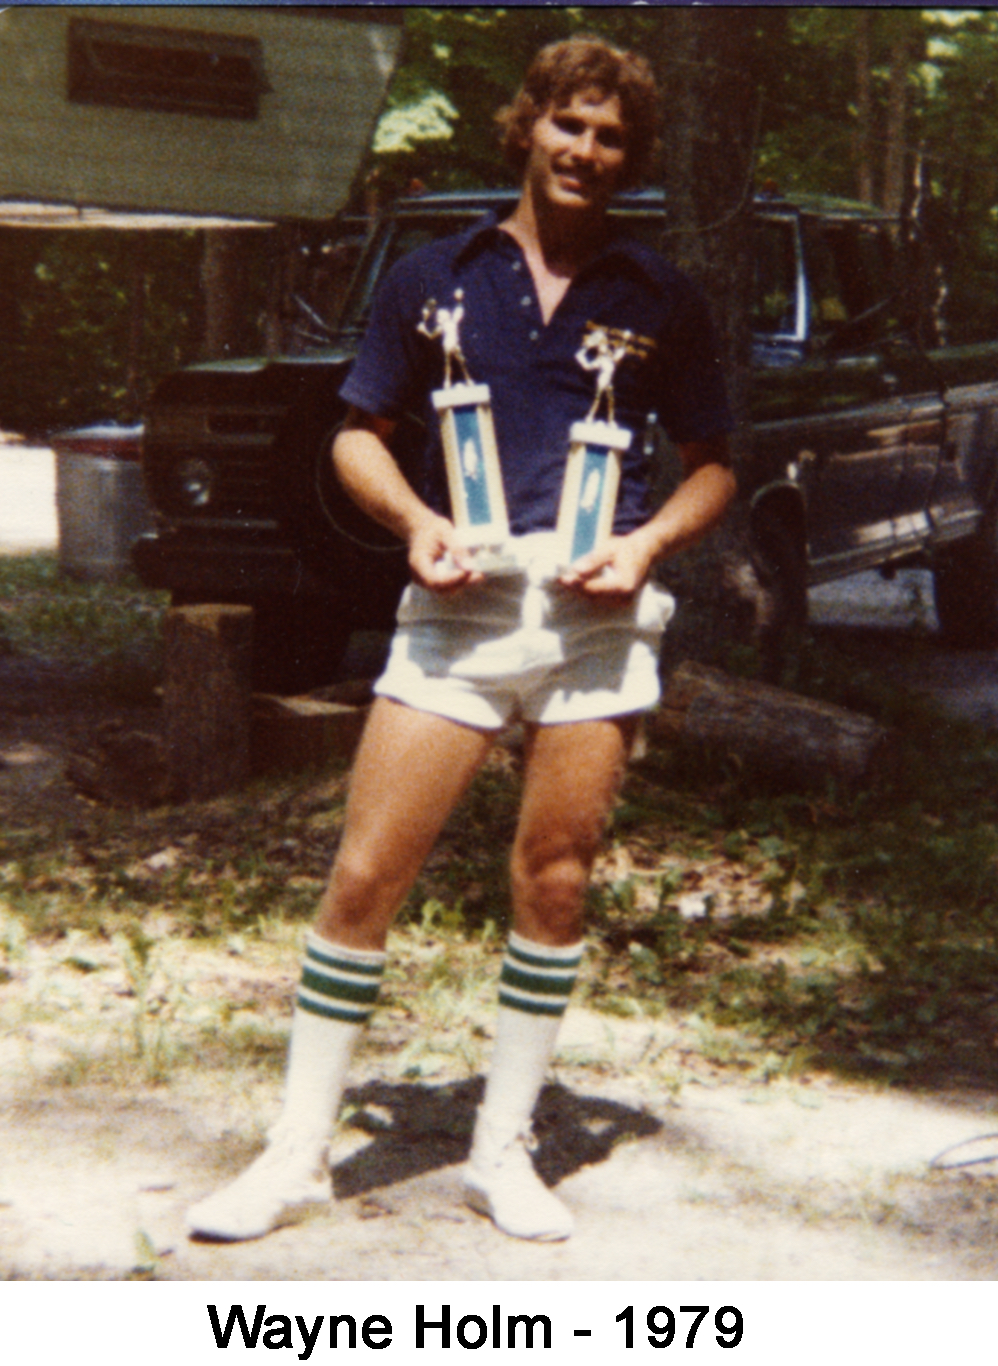 Wayne is standing in the yard in front of a pickup and holding two tennis trophies.